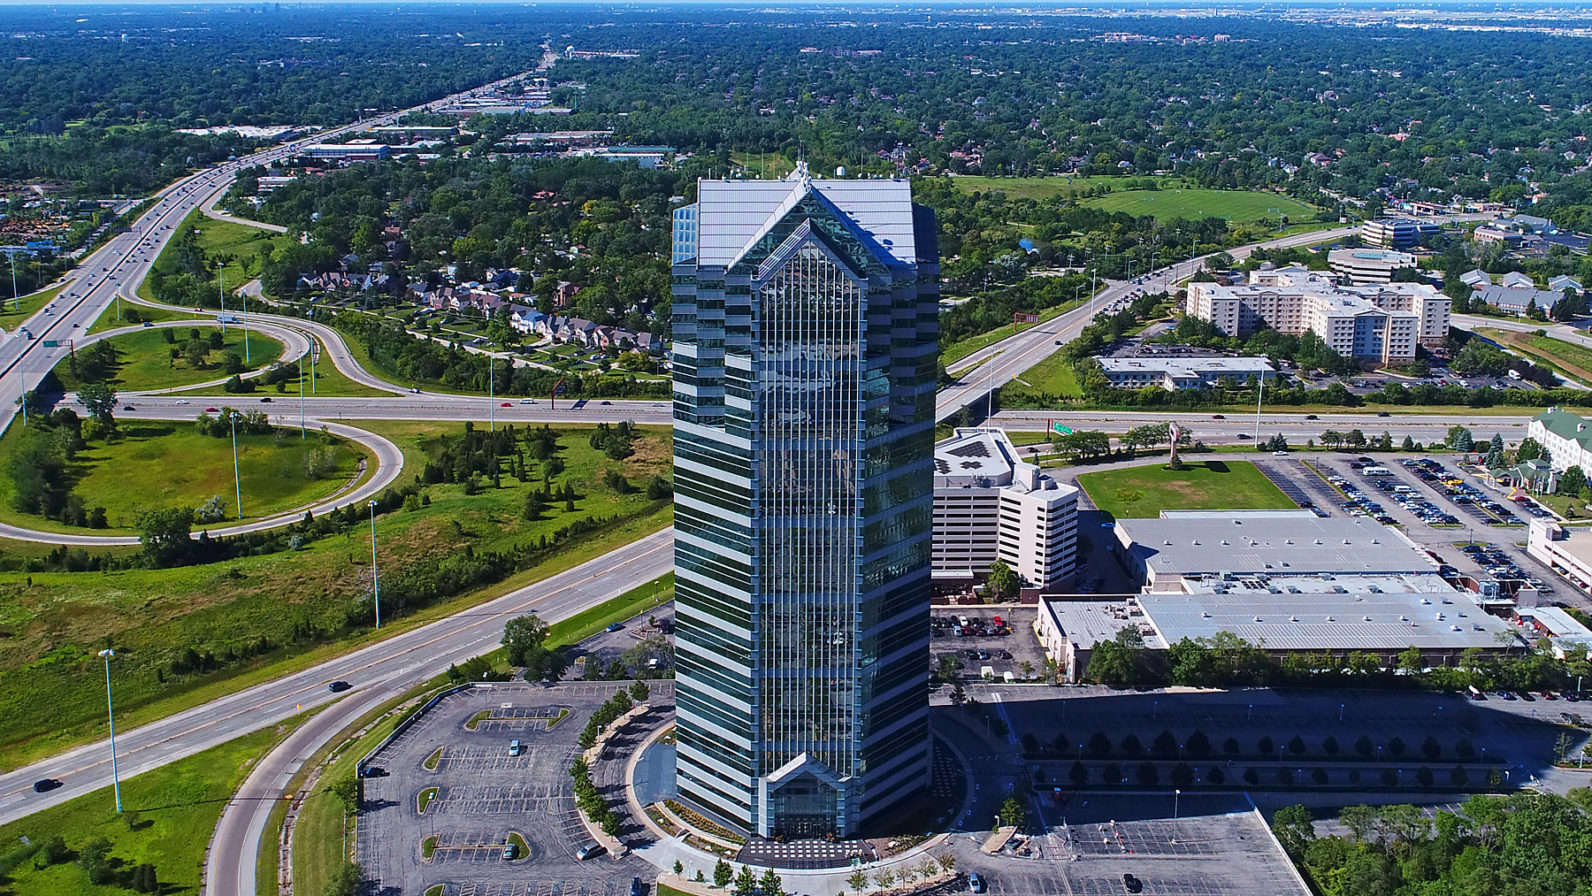 featured image for the oakbrook terrace tower image gallery